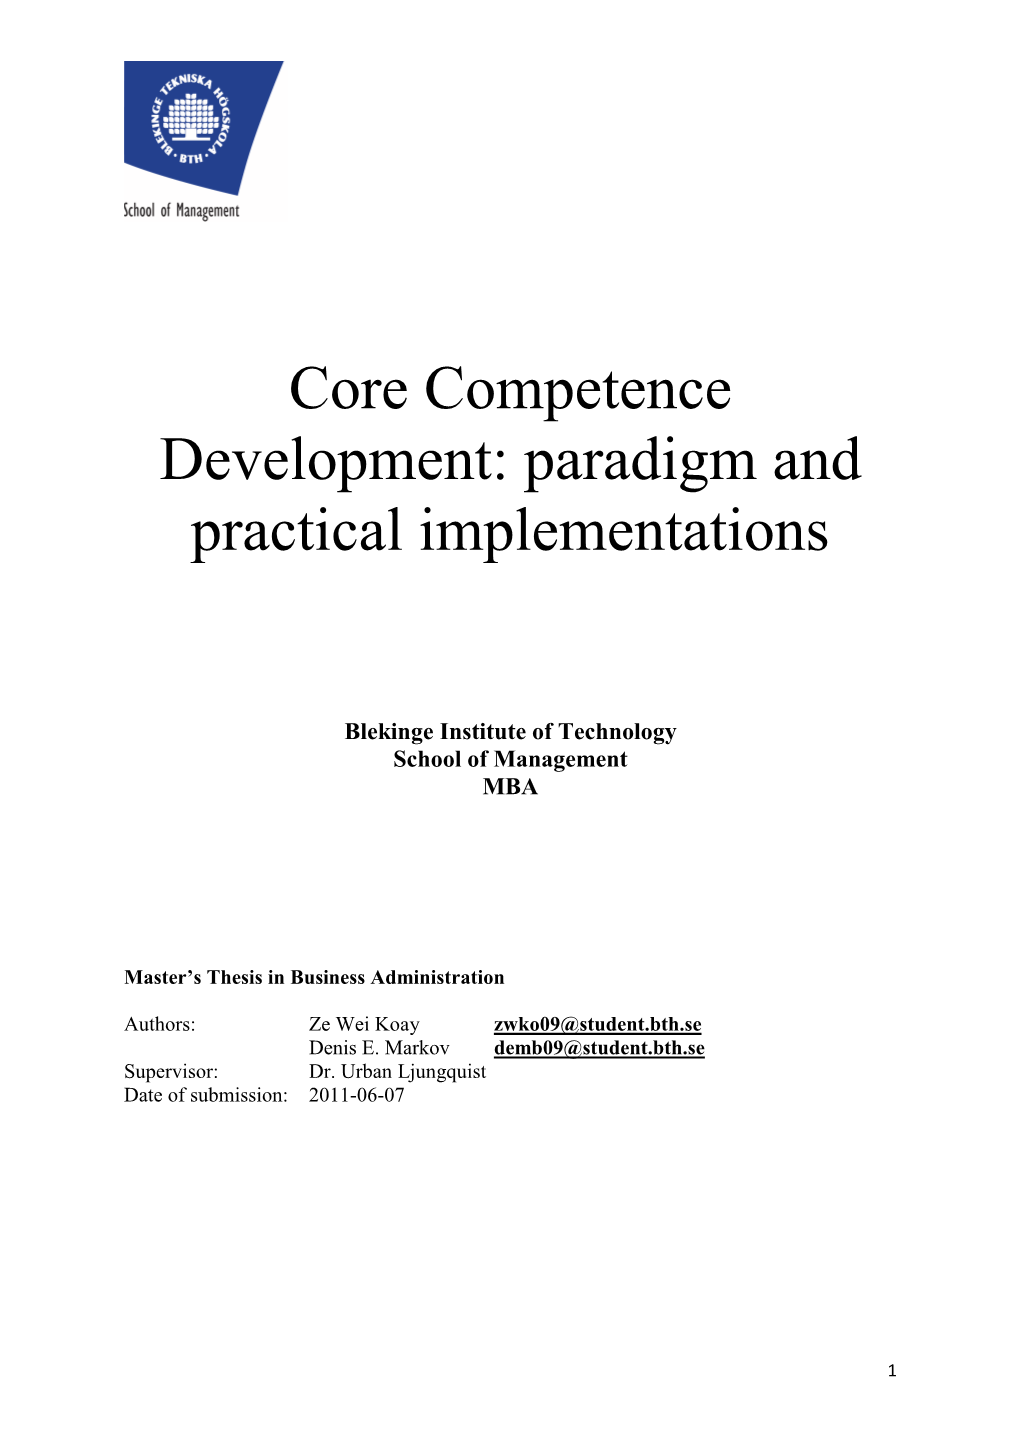 Core Competence Development: Paradigm and Practical Implementations